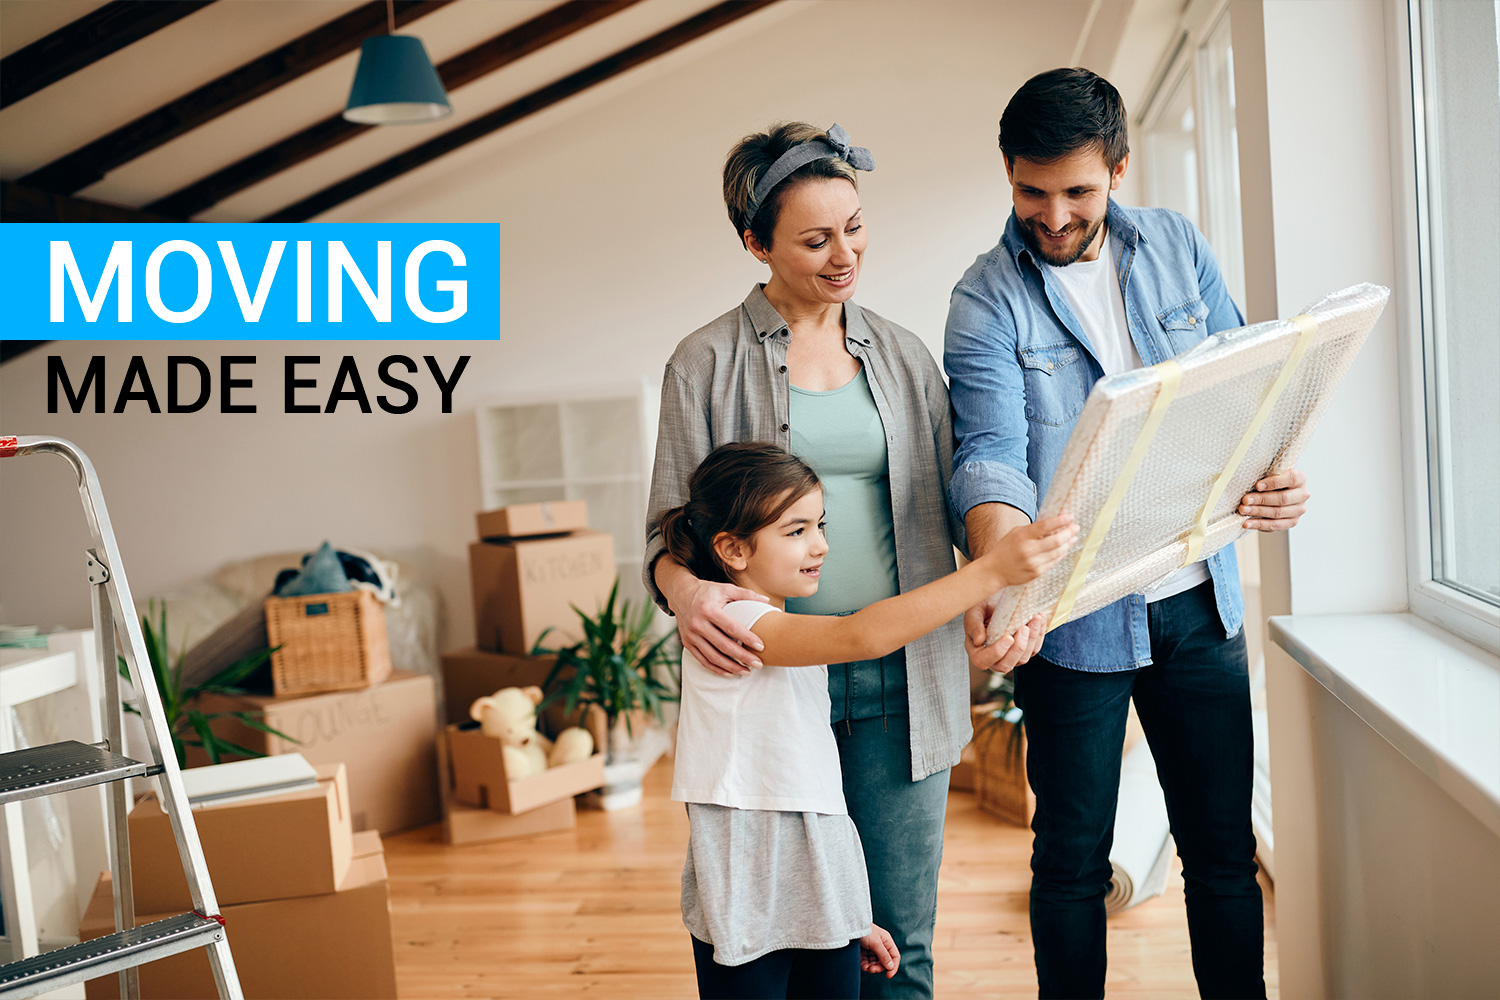 Moving Made Easy: The Importance of Planning and Preparation When Using a Packing and Removalist Service